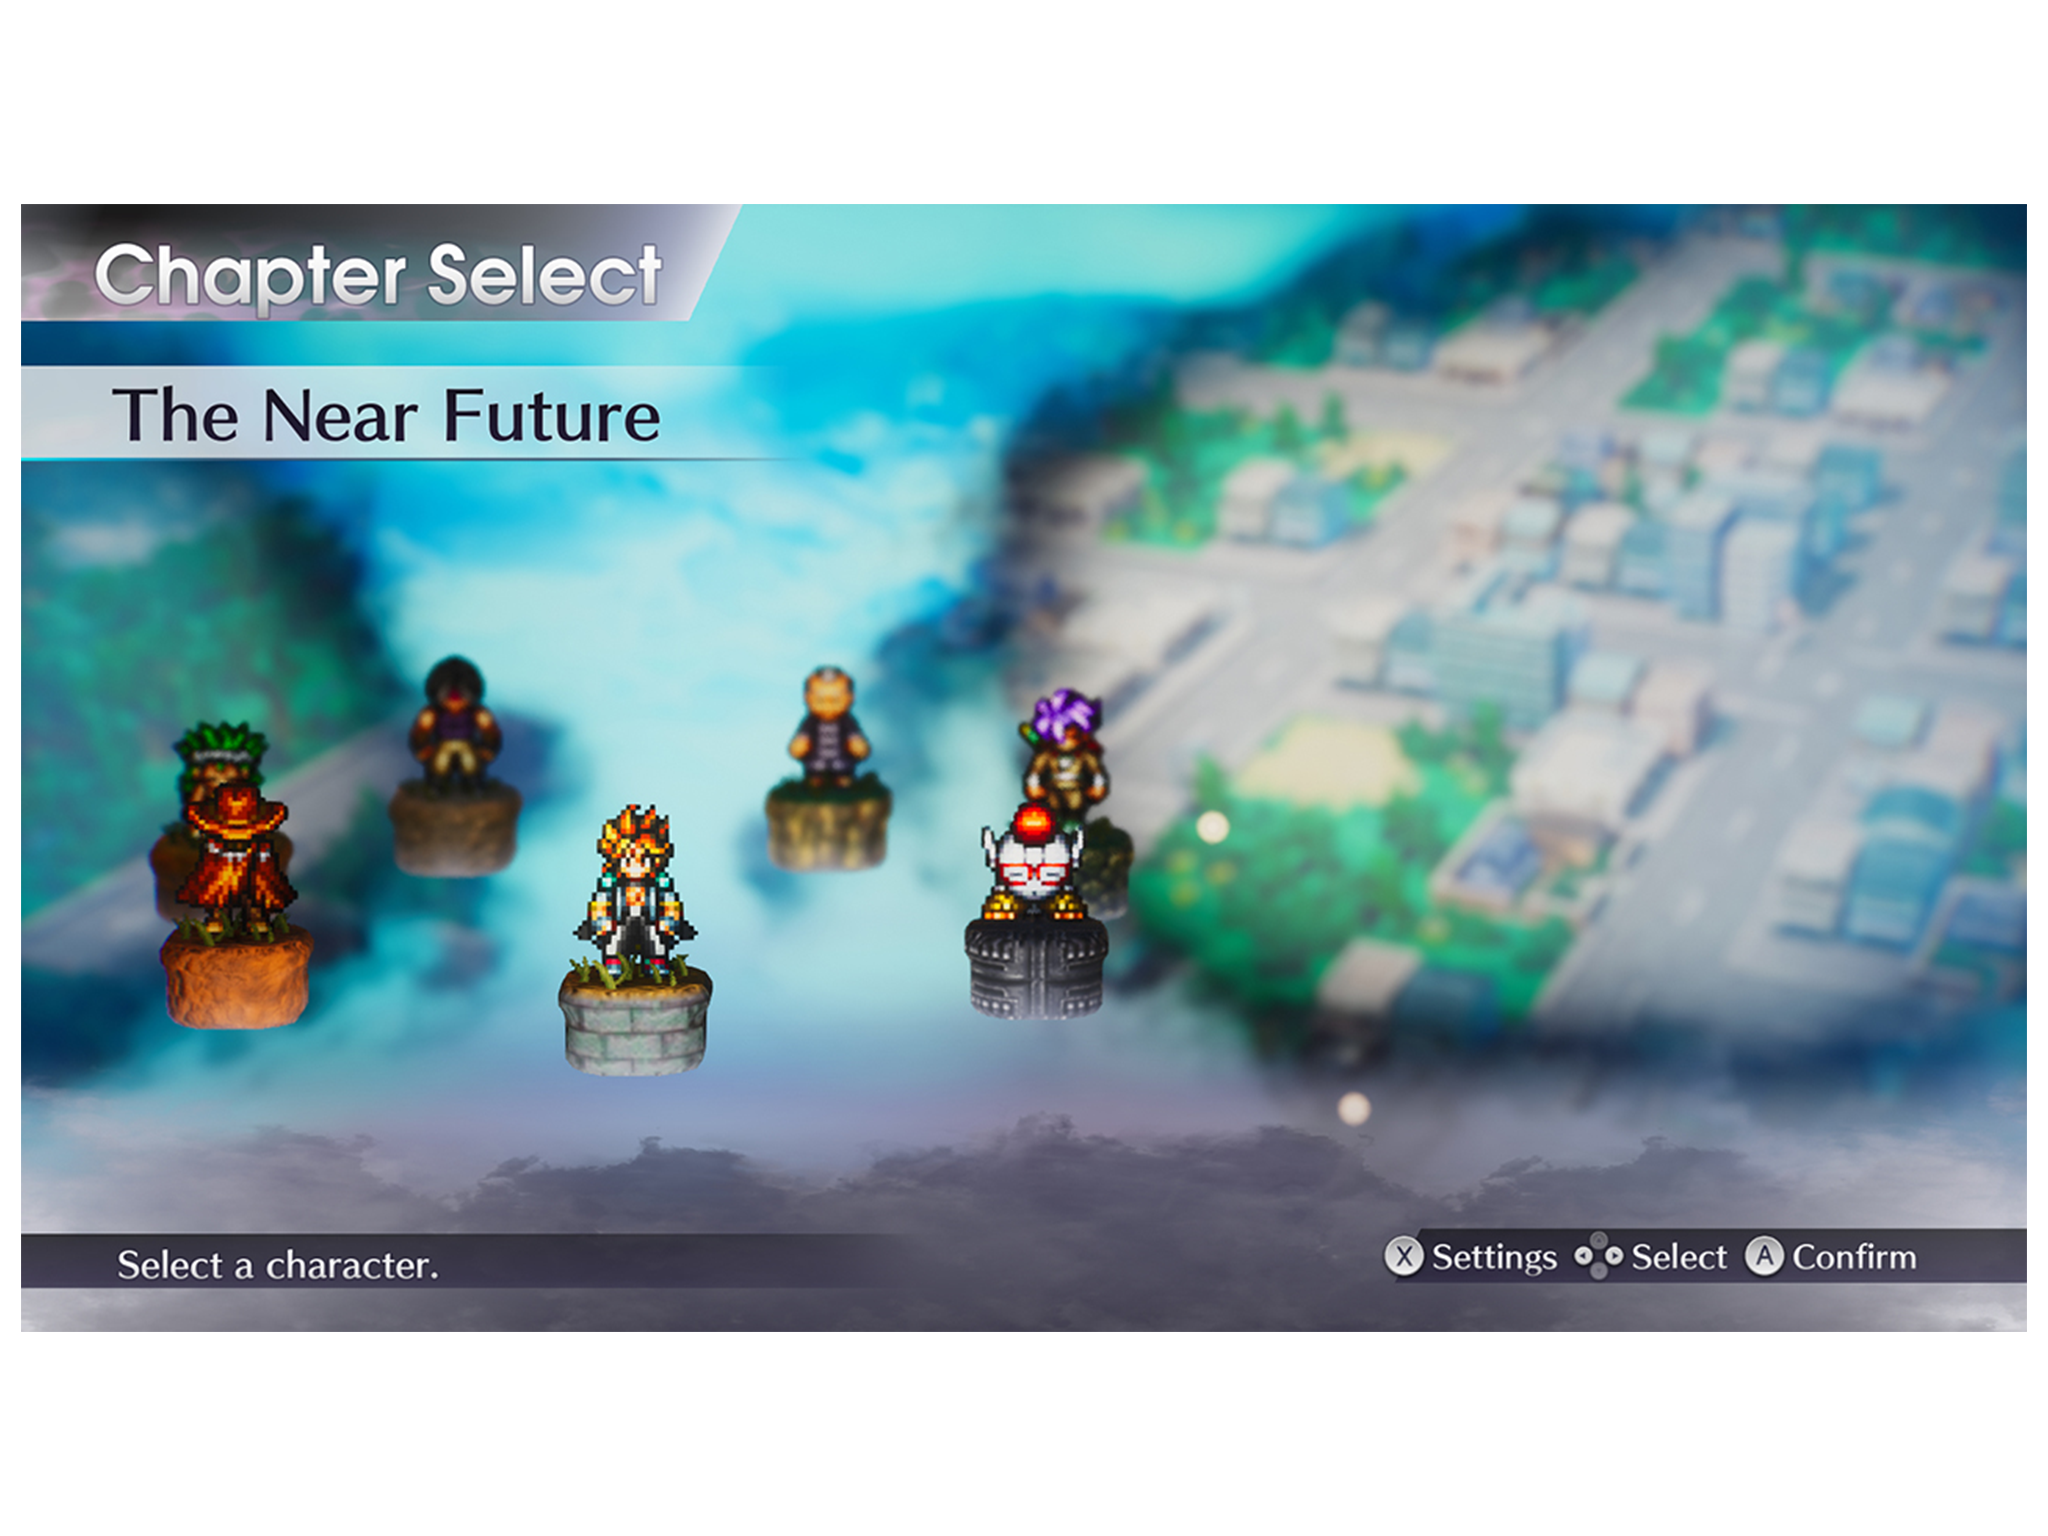 At the start of the game, choose from one of seven characters